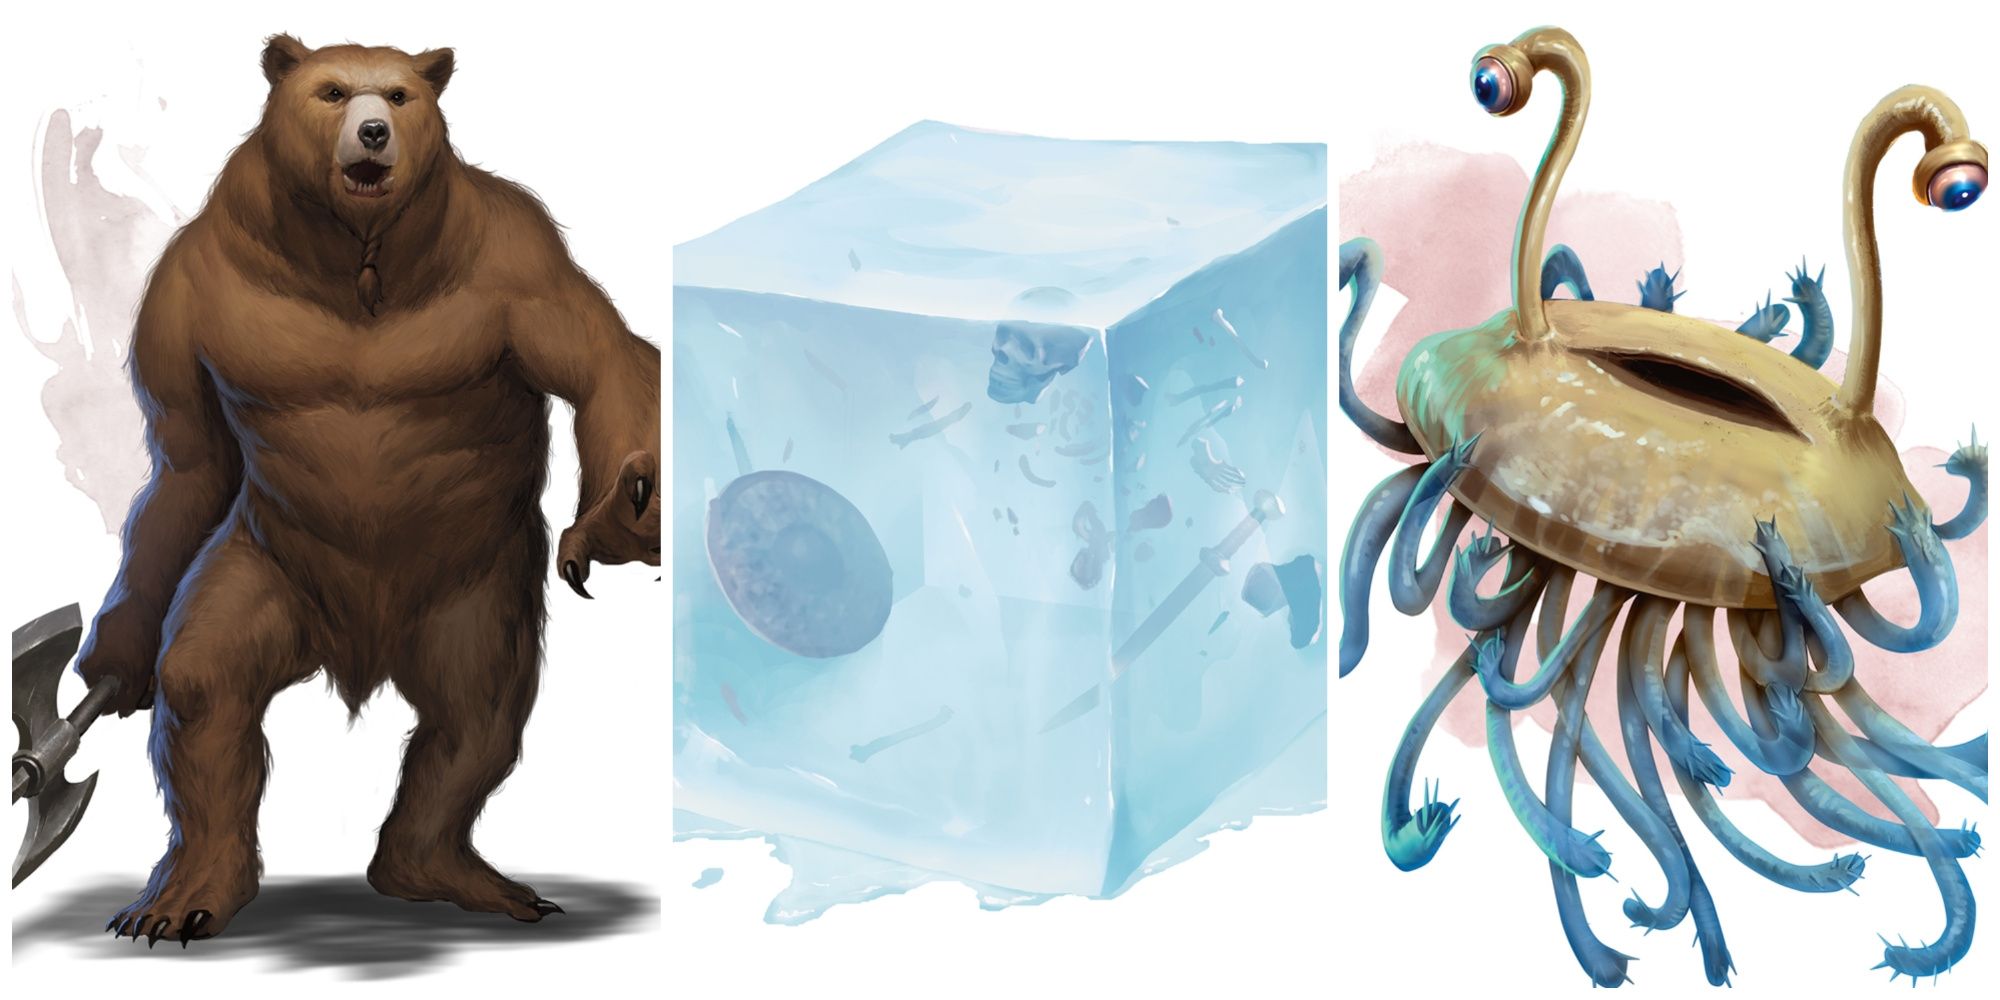 Werebear, Gelatinous Cube, & Flumph Illustrations From Dungeons And Dragons Monster Manual